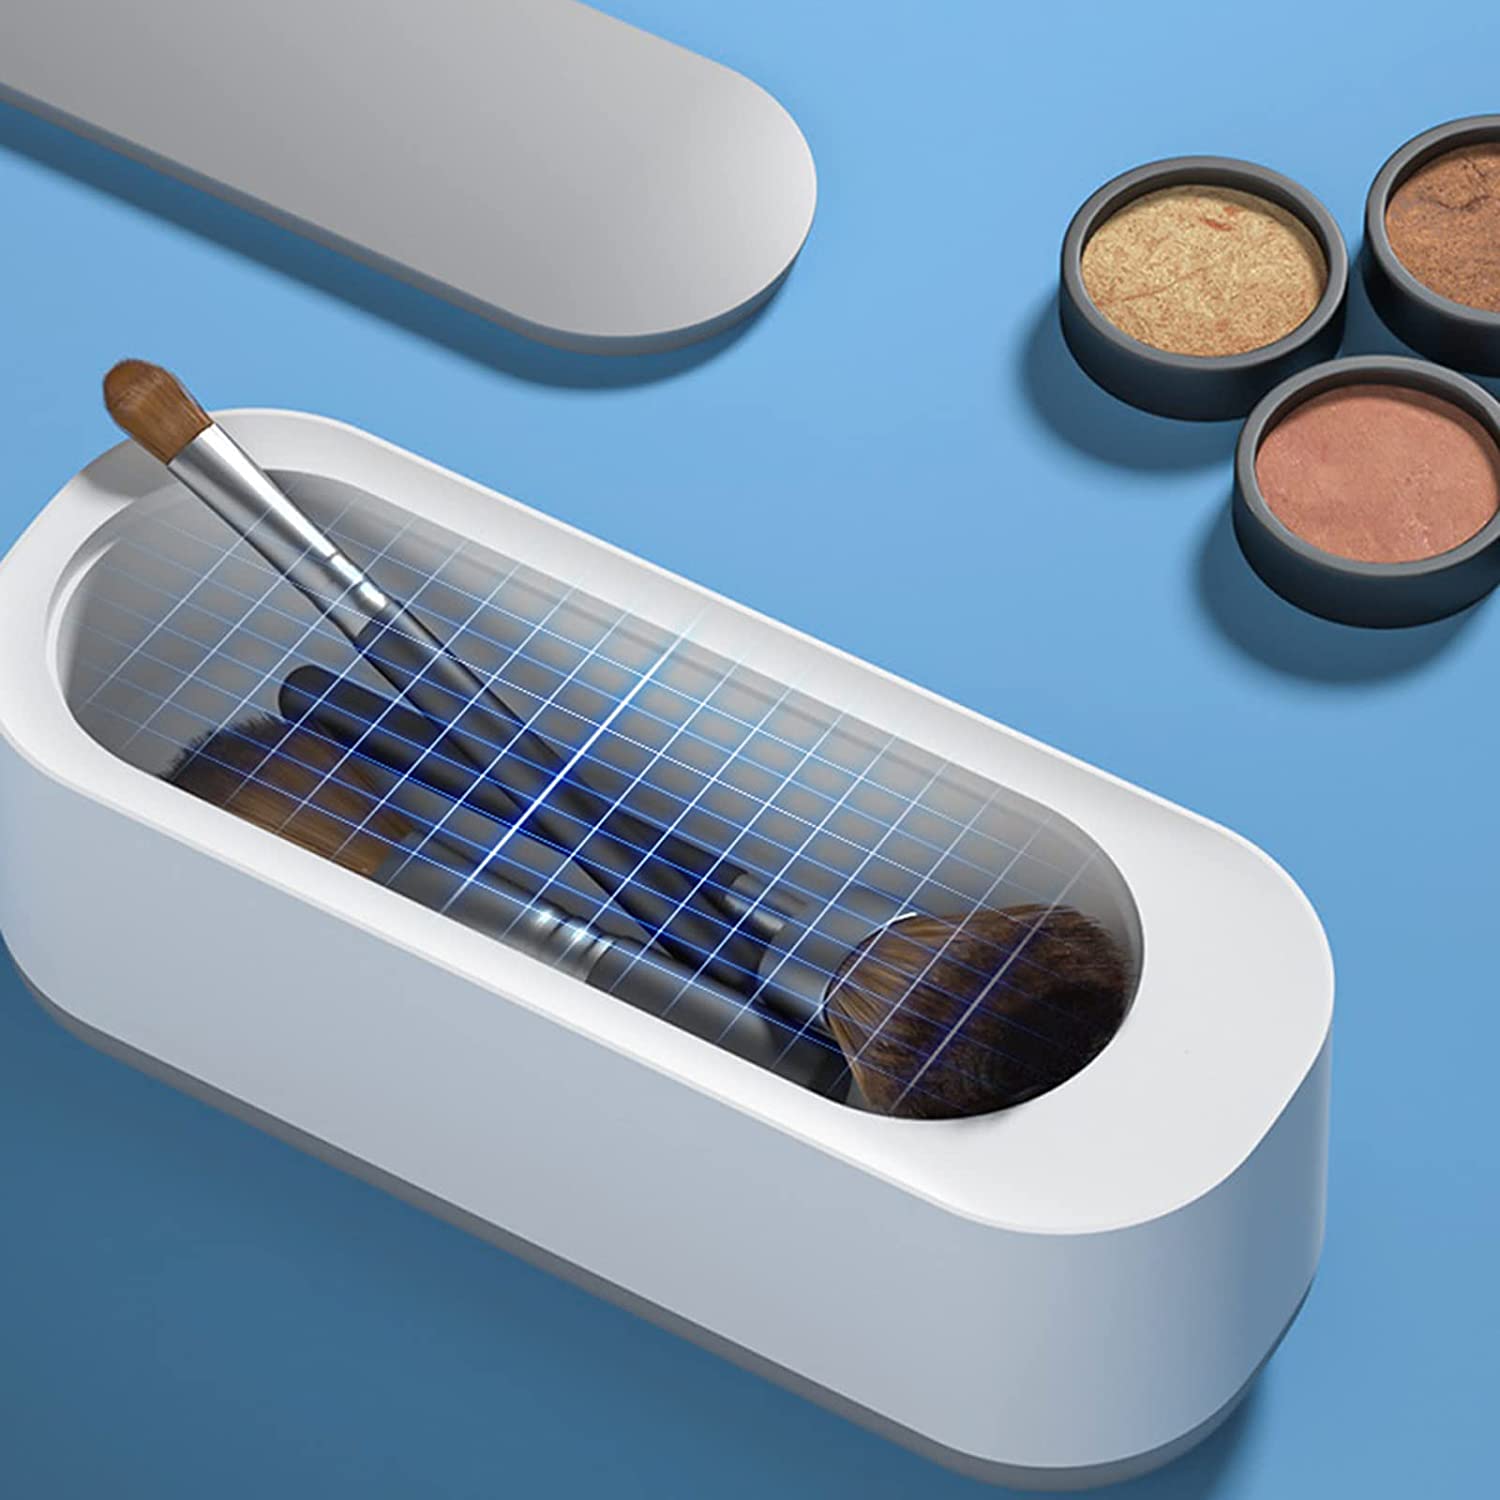 Portable Ultrasonic Cleaner-Topselling